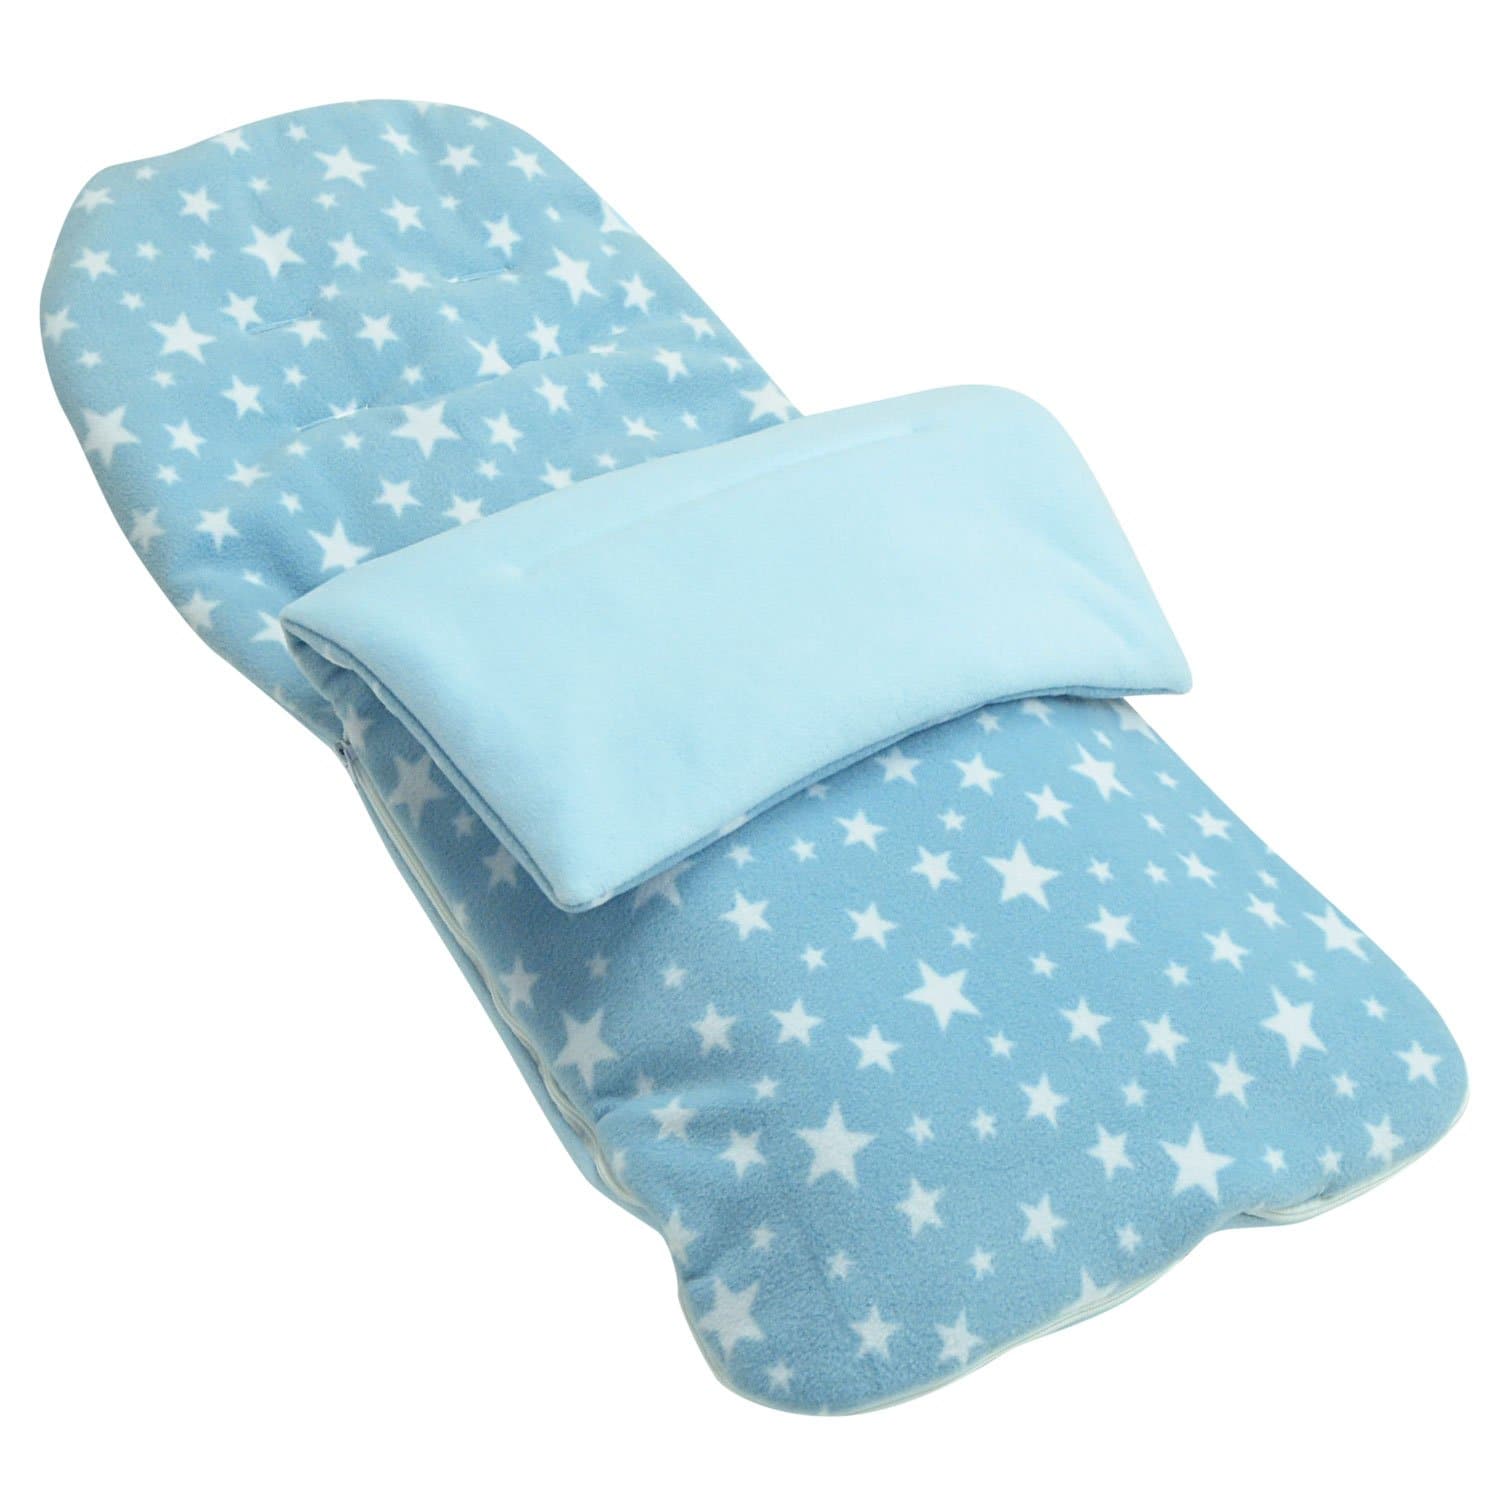 Universal Fleece Pushchair Footmuff / Cosy Toes - Fits All Pushchairs / Prams And Buggies -  | For Your Little One